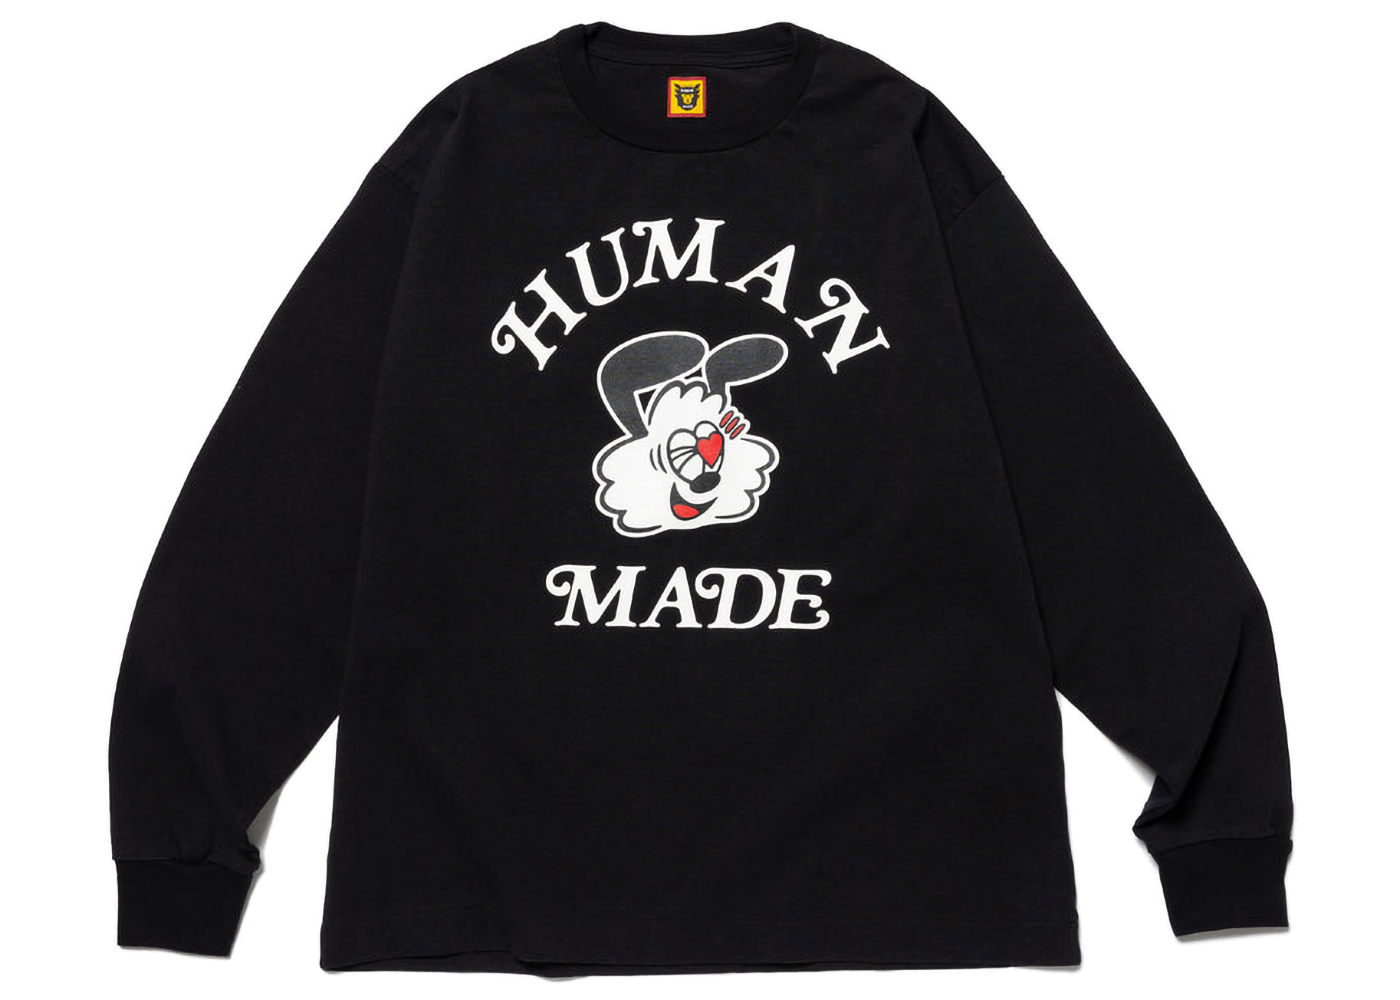 HUMAN MADE GDC WHITE DAY L/S T-SHIRT-